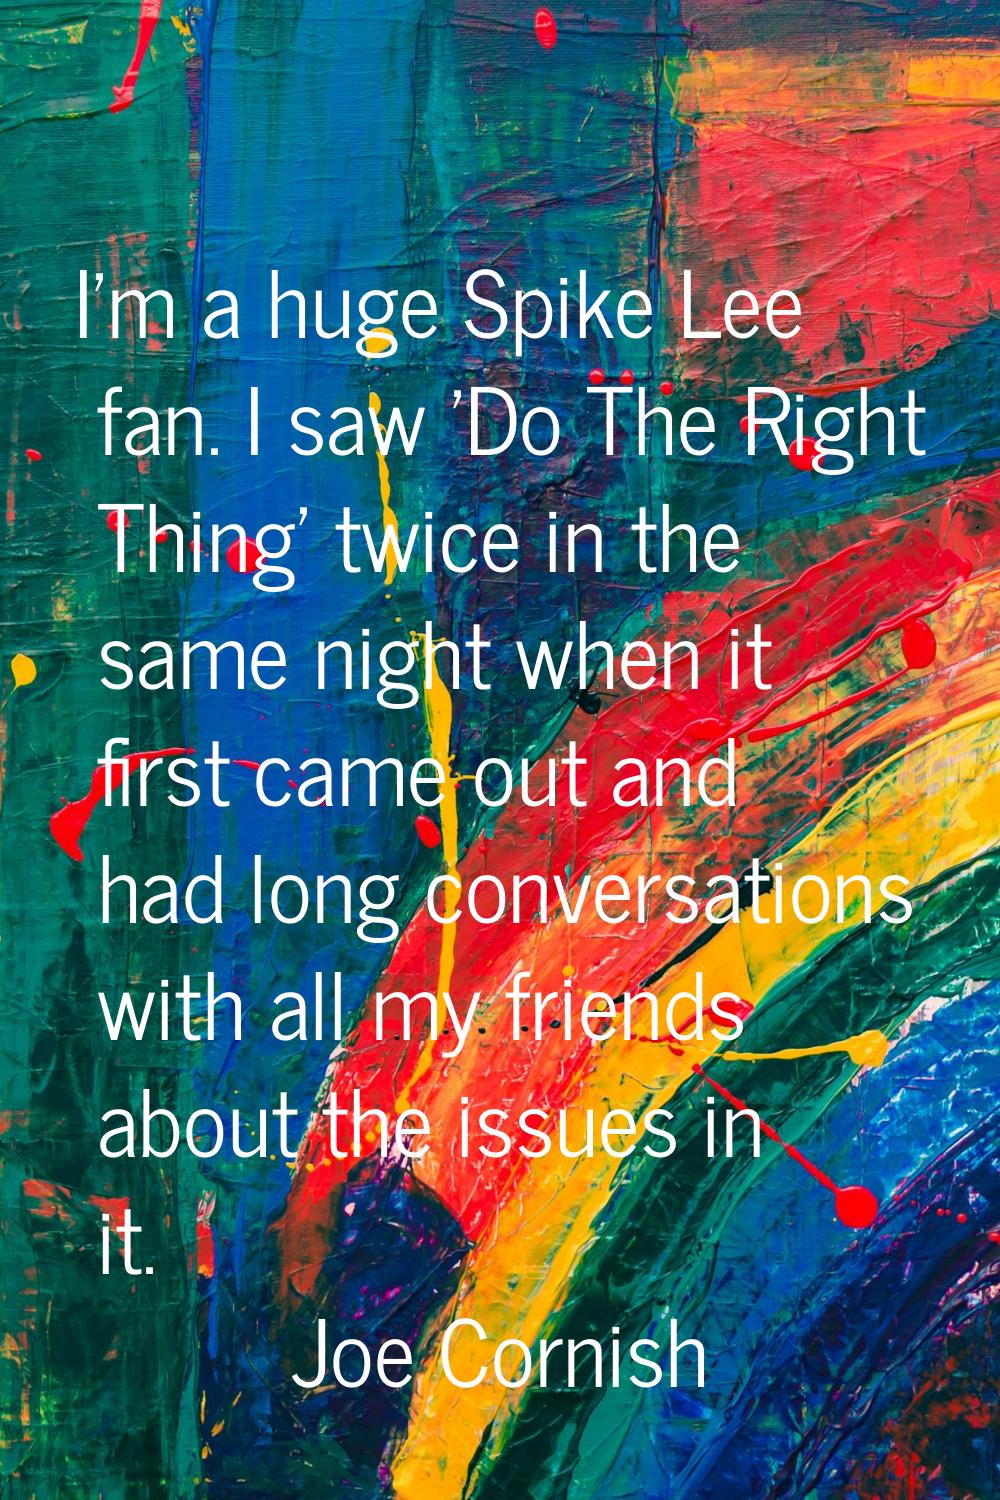 I'm a huge Spike Lee fan. I saw 'Do The Right Thing' twice in the same night when it first came out